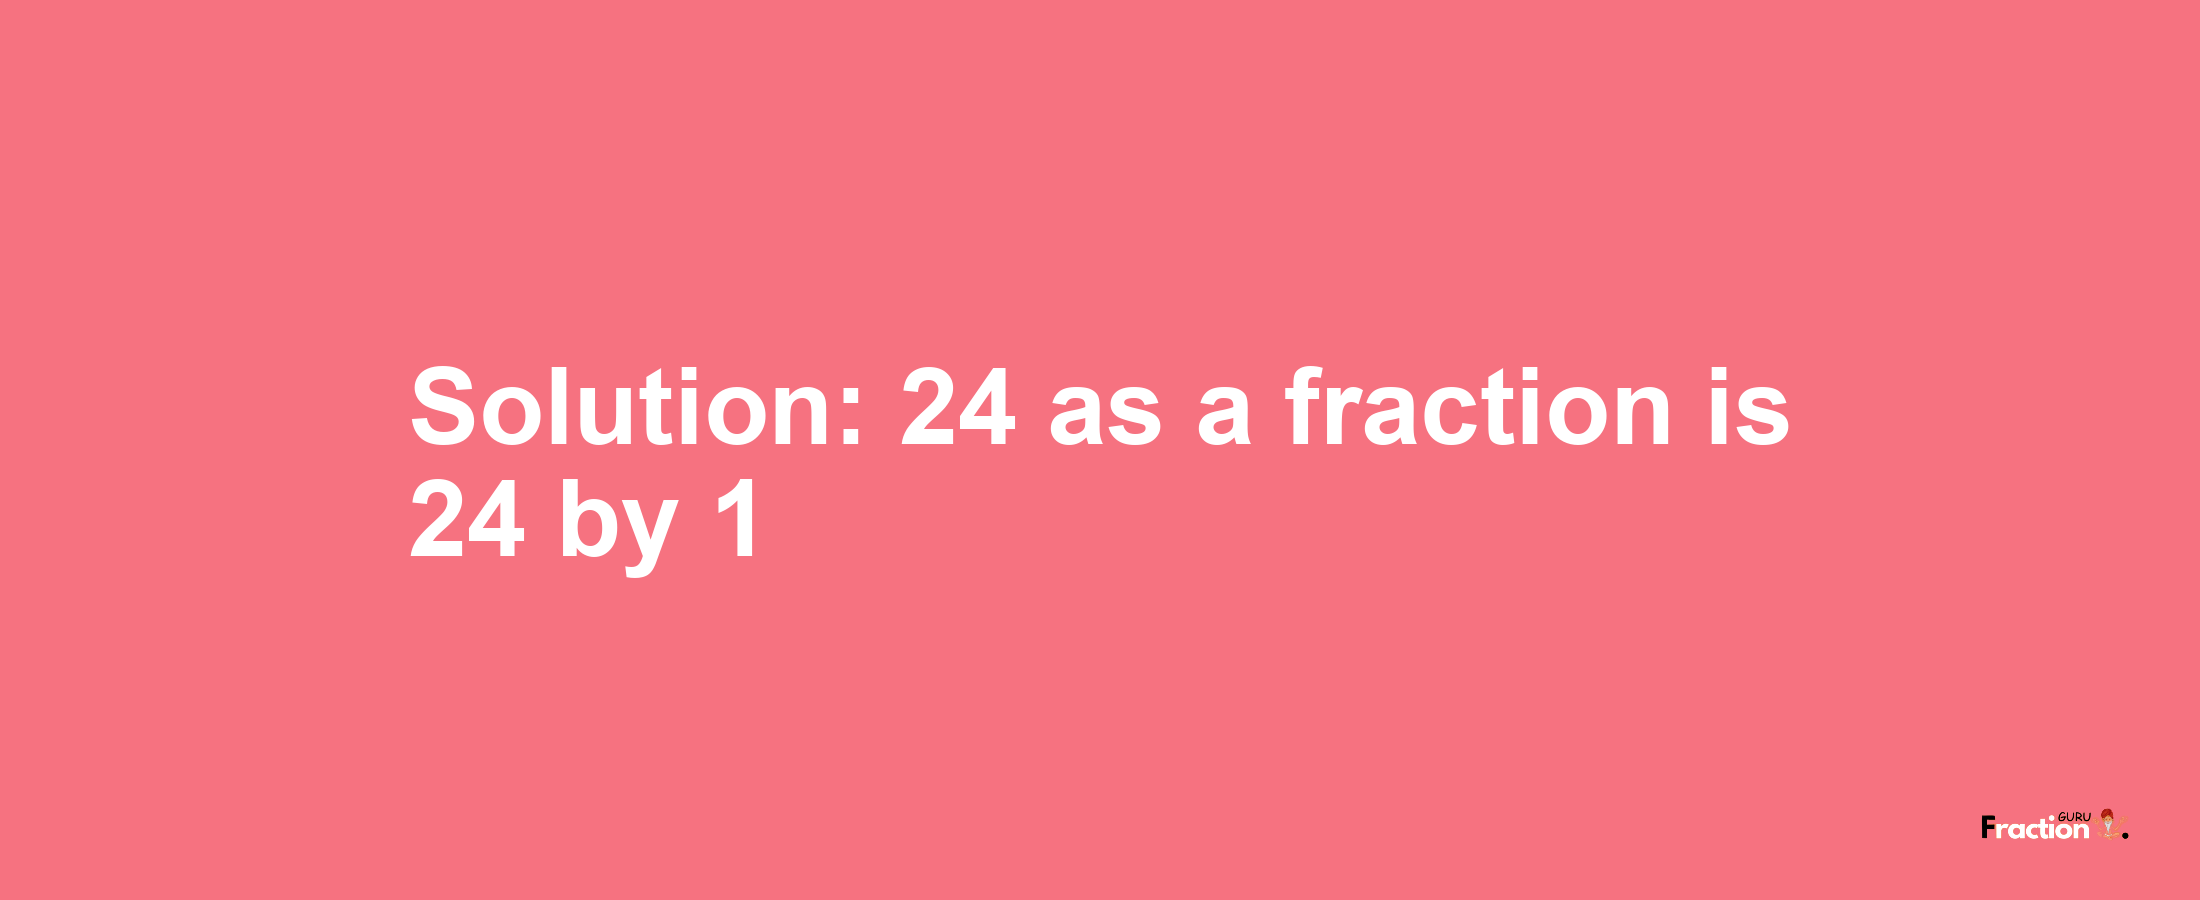 Solution:24 as a fraction is 24/1